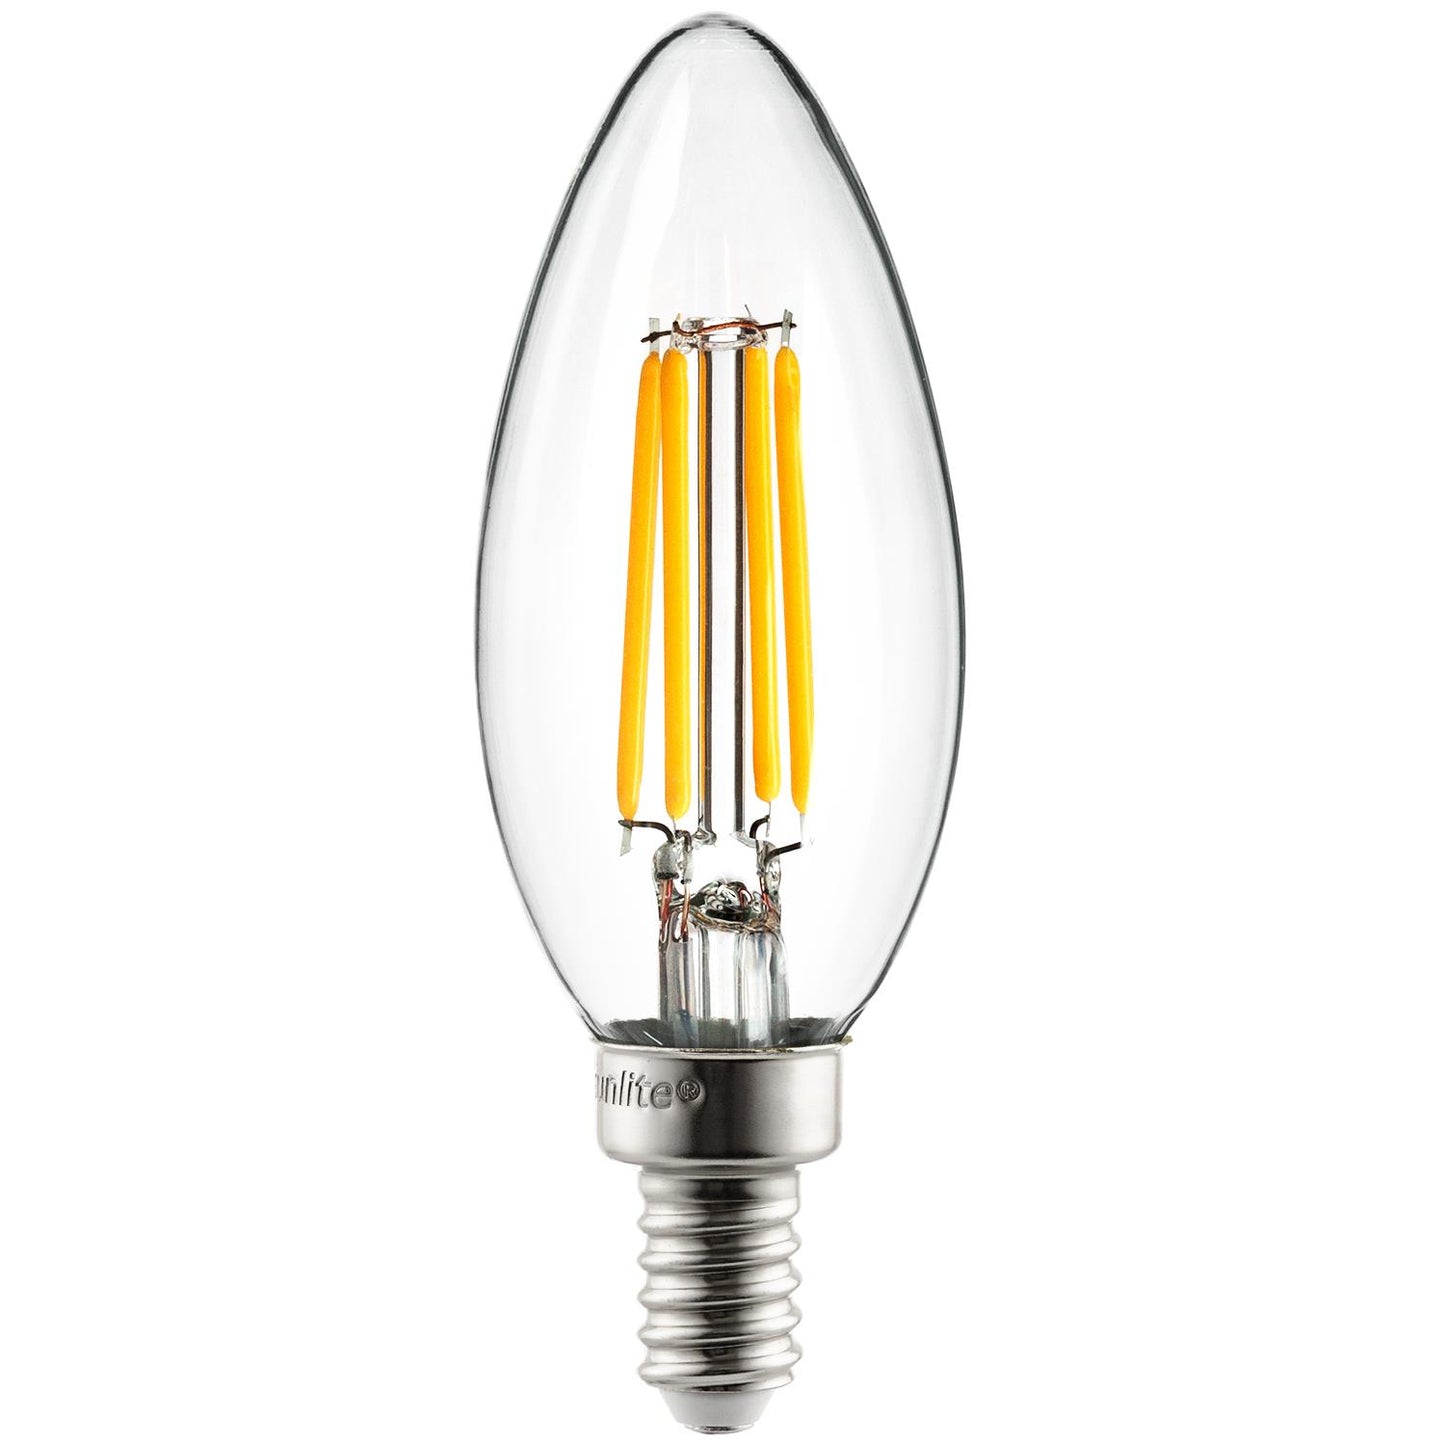 Sunlite 80663-SU LED Filament Chandelier Bulb with Torpedo Tip, 4 Watts (40W Equivalent), Candelabra Base (E12), Clear, Dimmable, 27K - Warm White 1 Pack